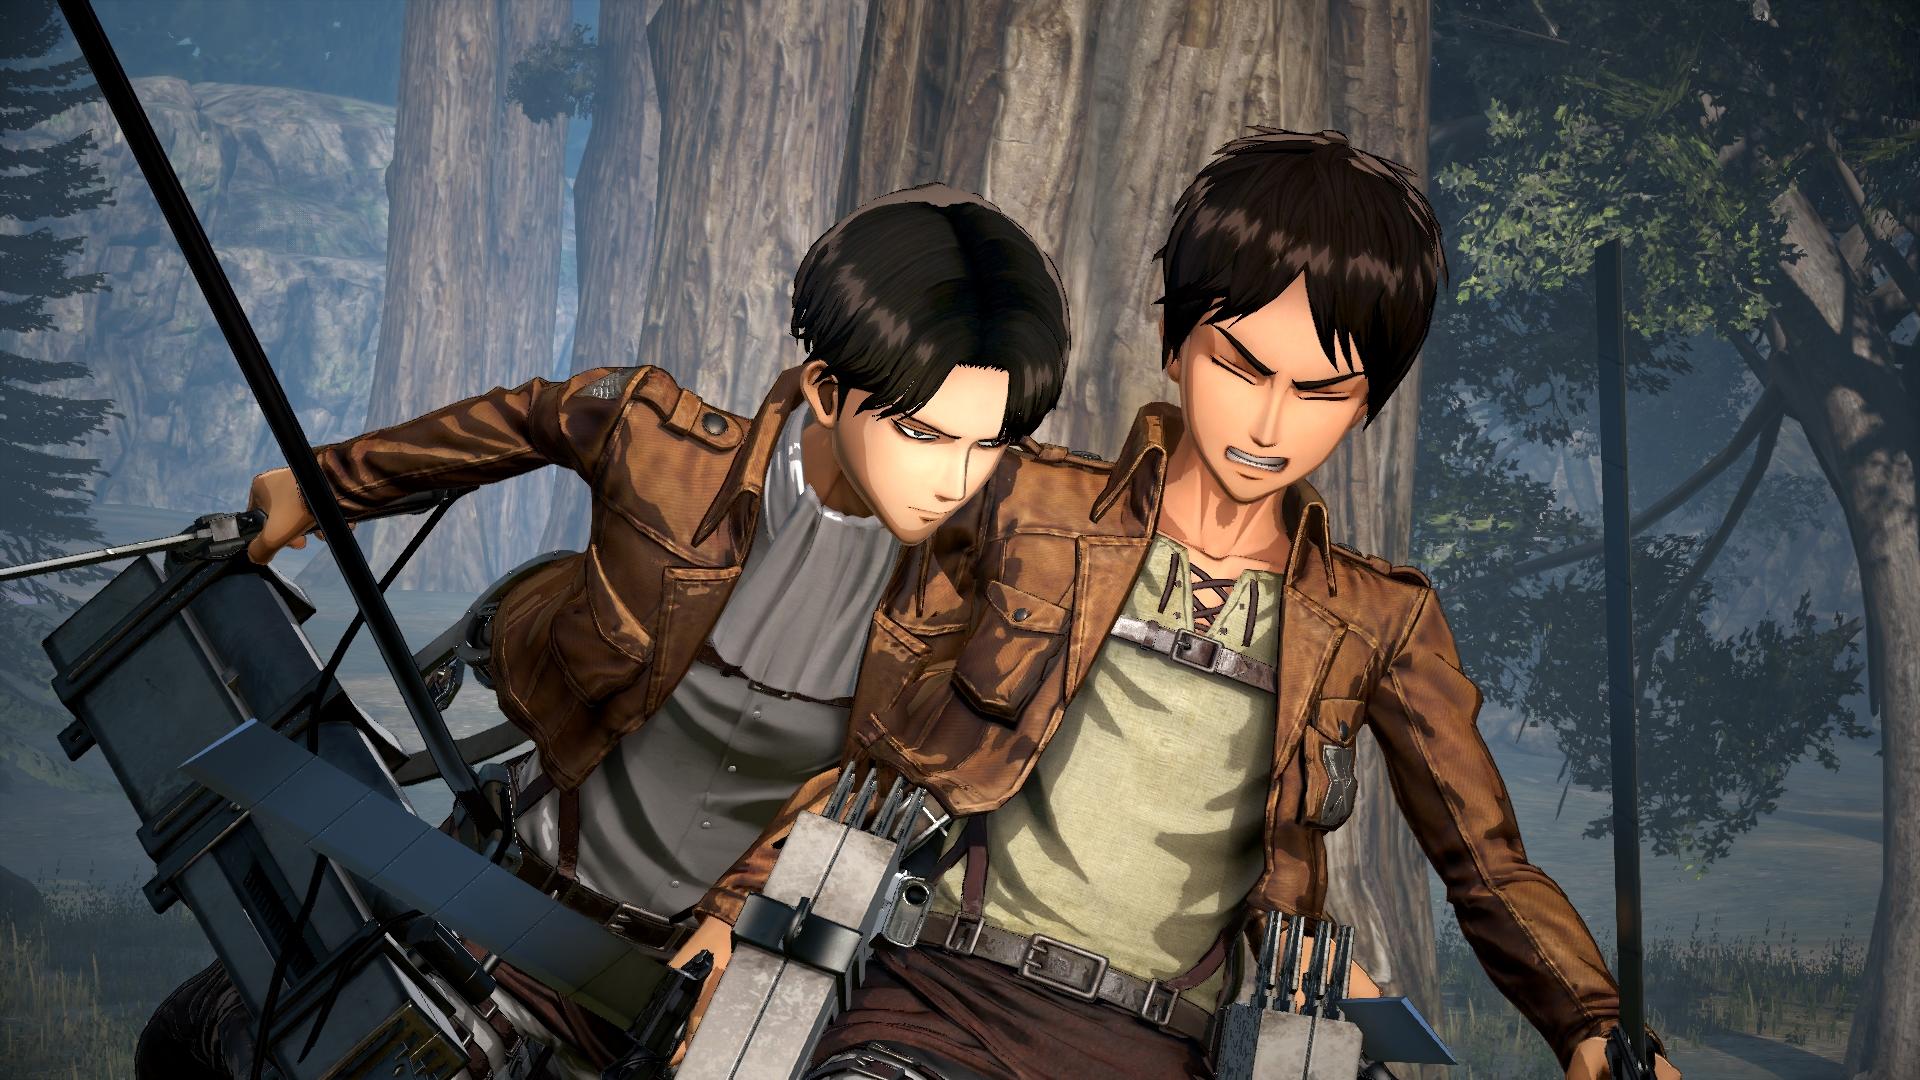 Attack on Titan Game Download